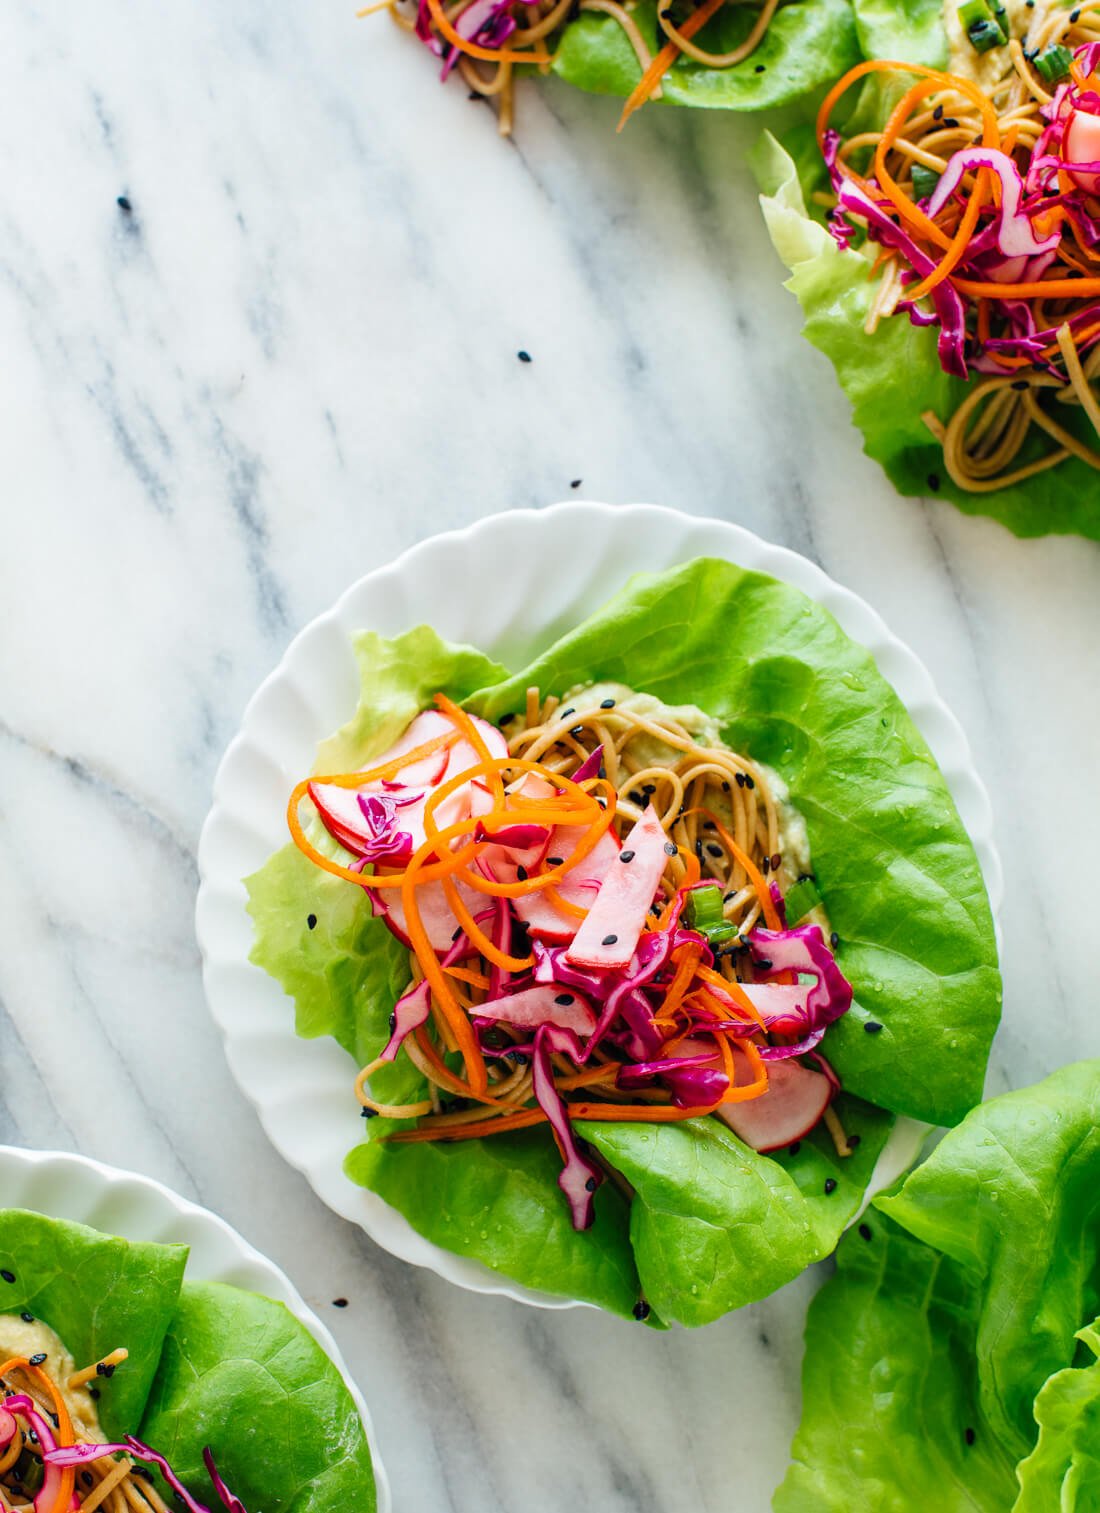 These healthy lettuce wraps are colorful, fun to eat, and delicious!  They are vegetarian/vegan, and easily gluten free.  Get the recipe at cookieandkate.com